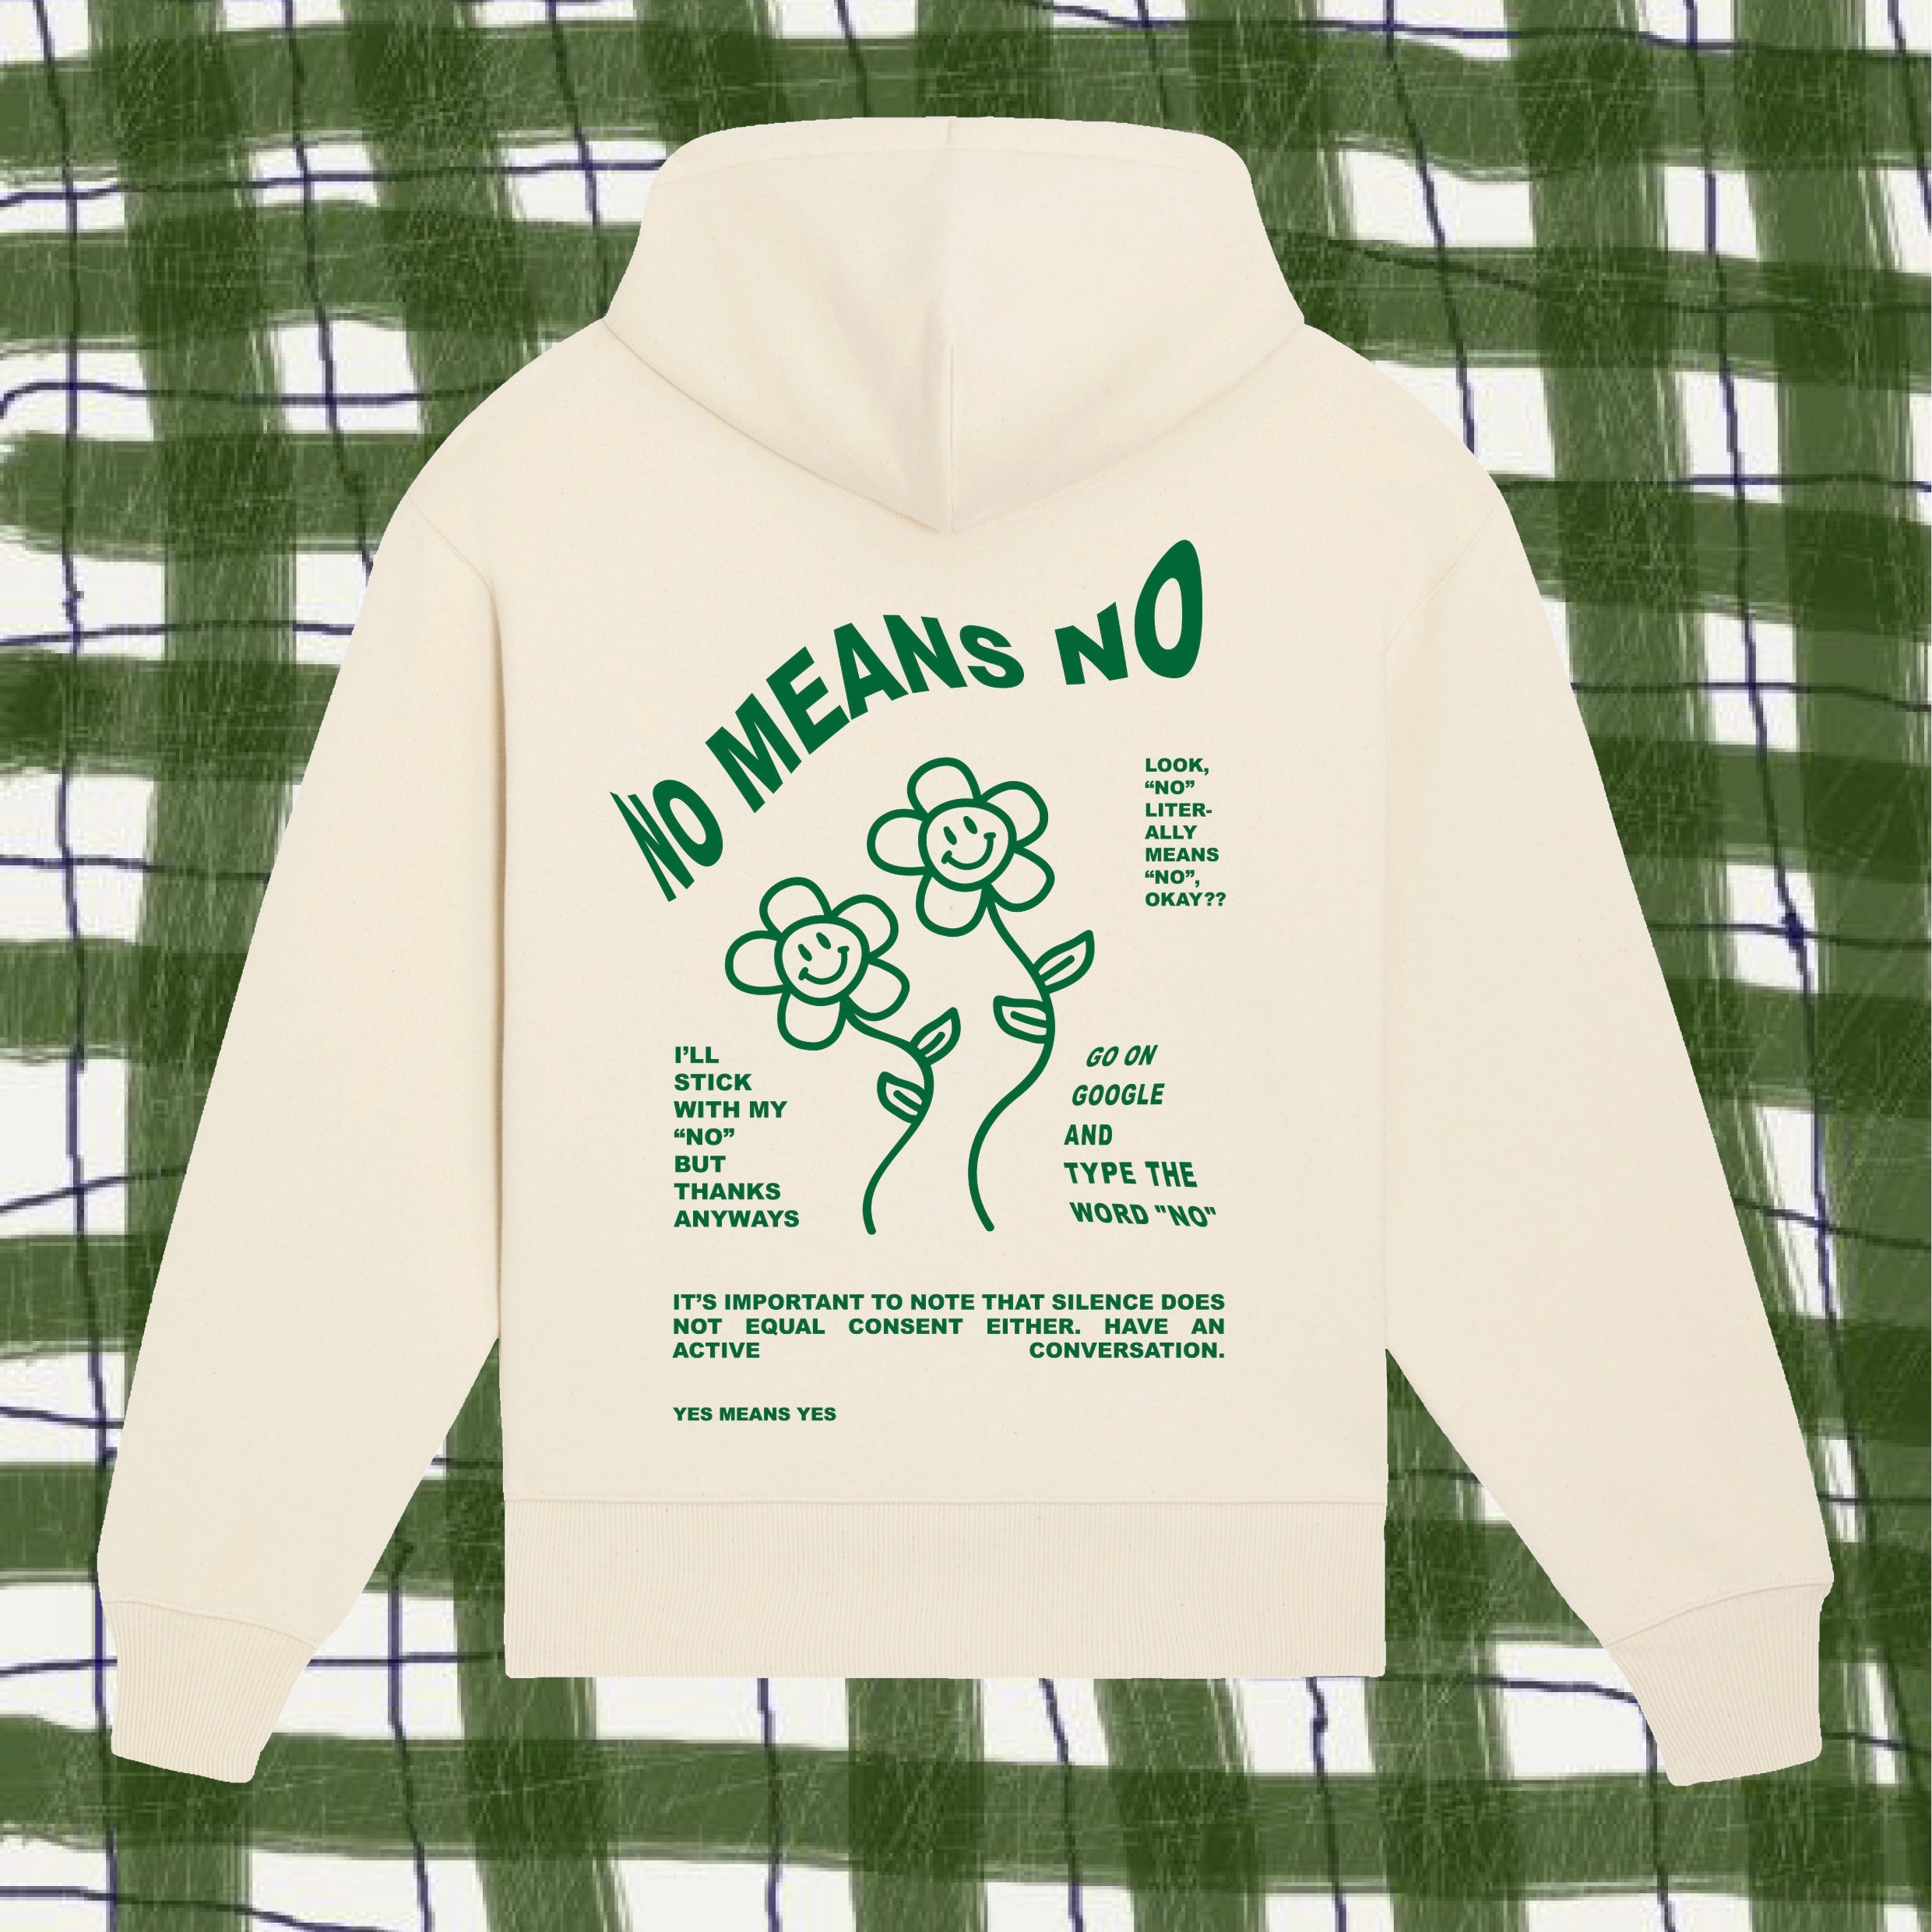 NO MEANS NO HOODIE NATURAL RAW